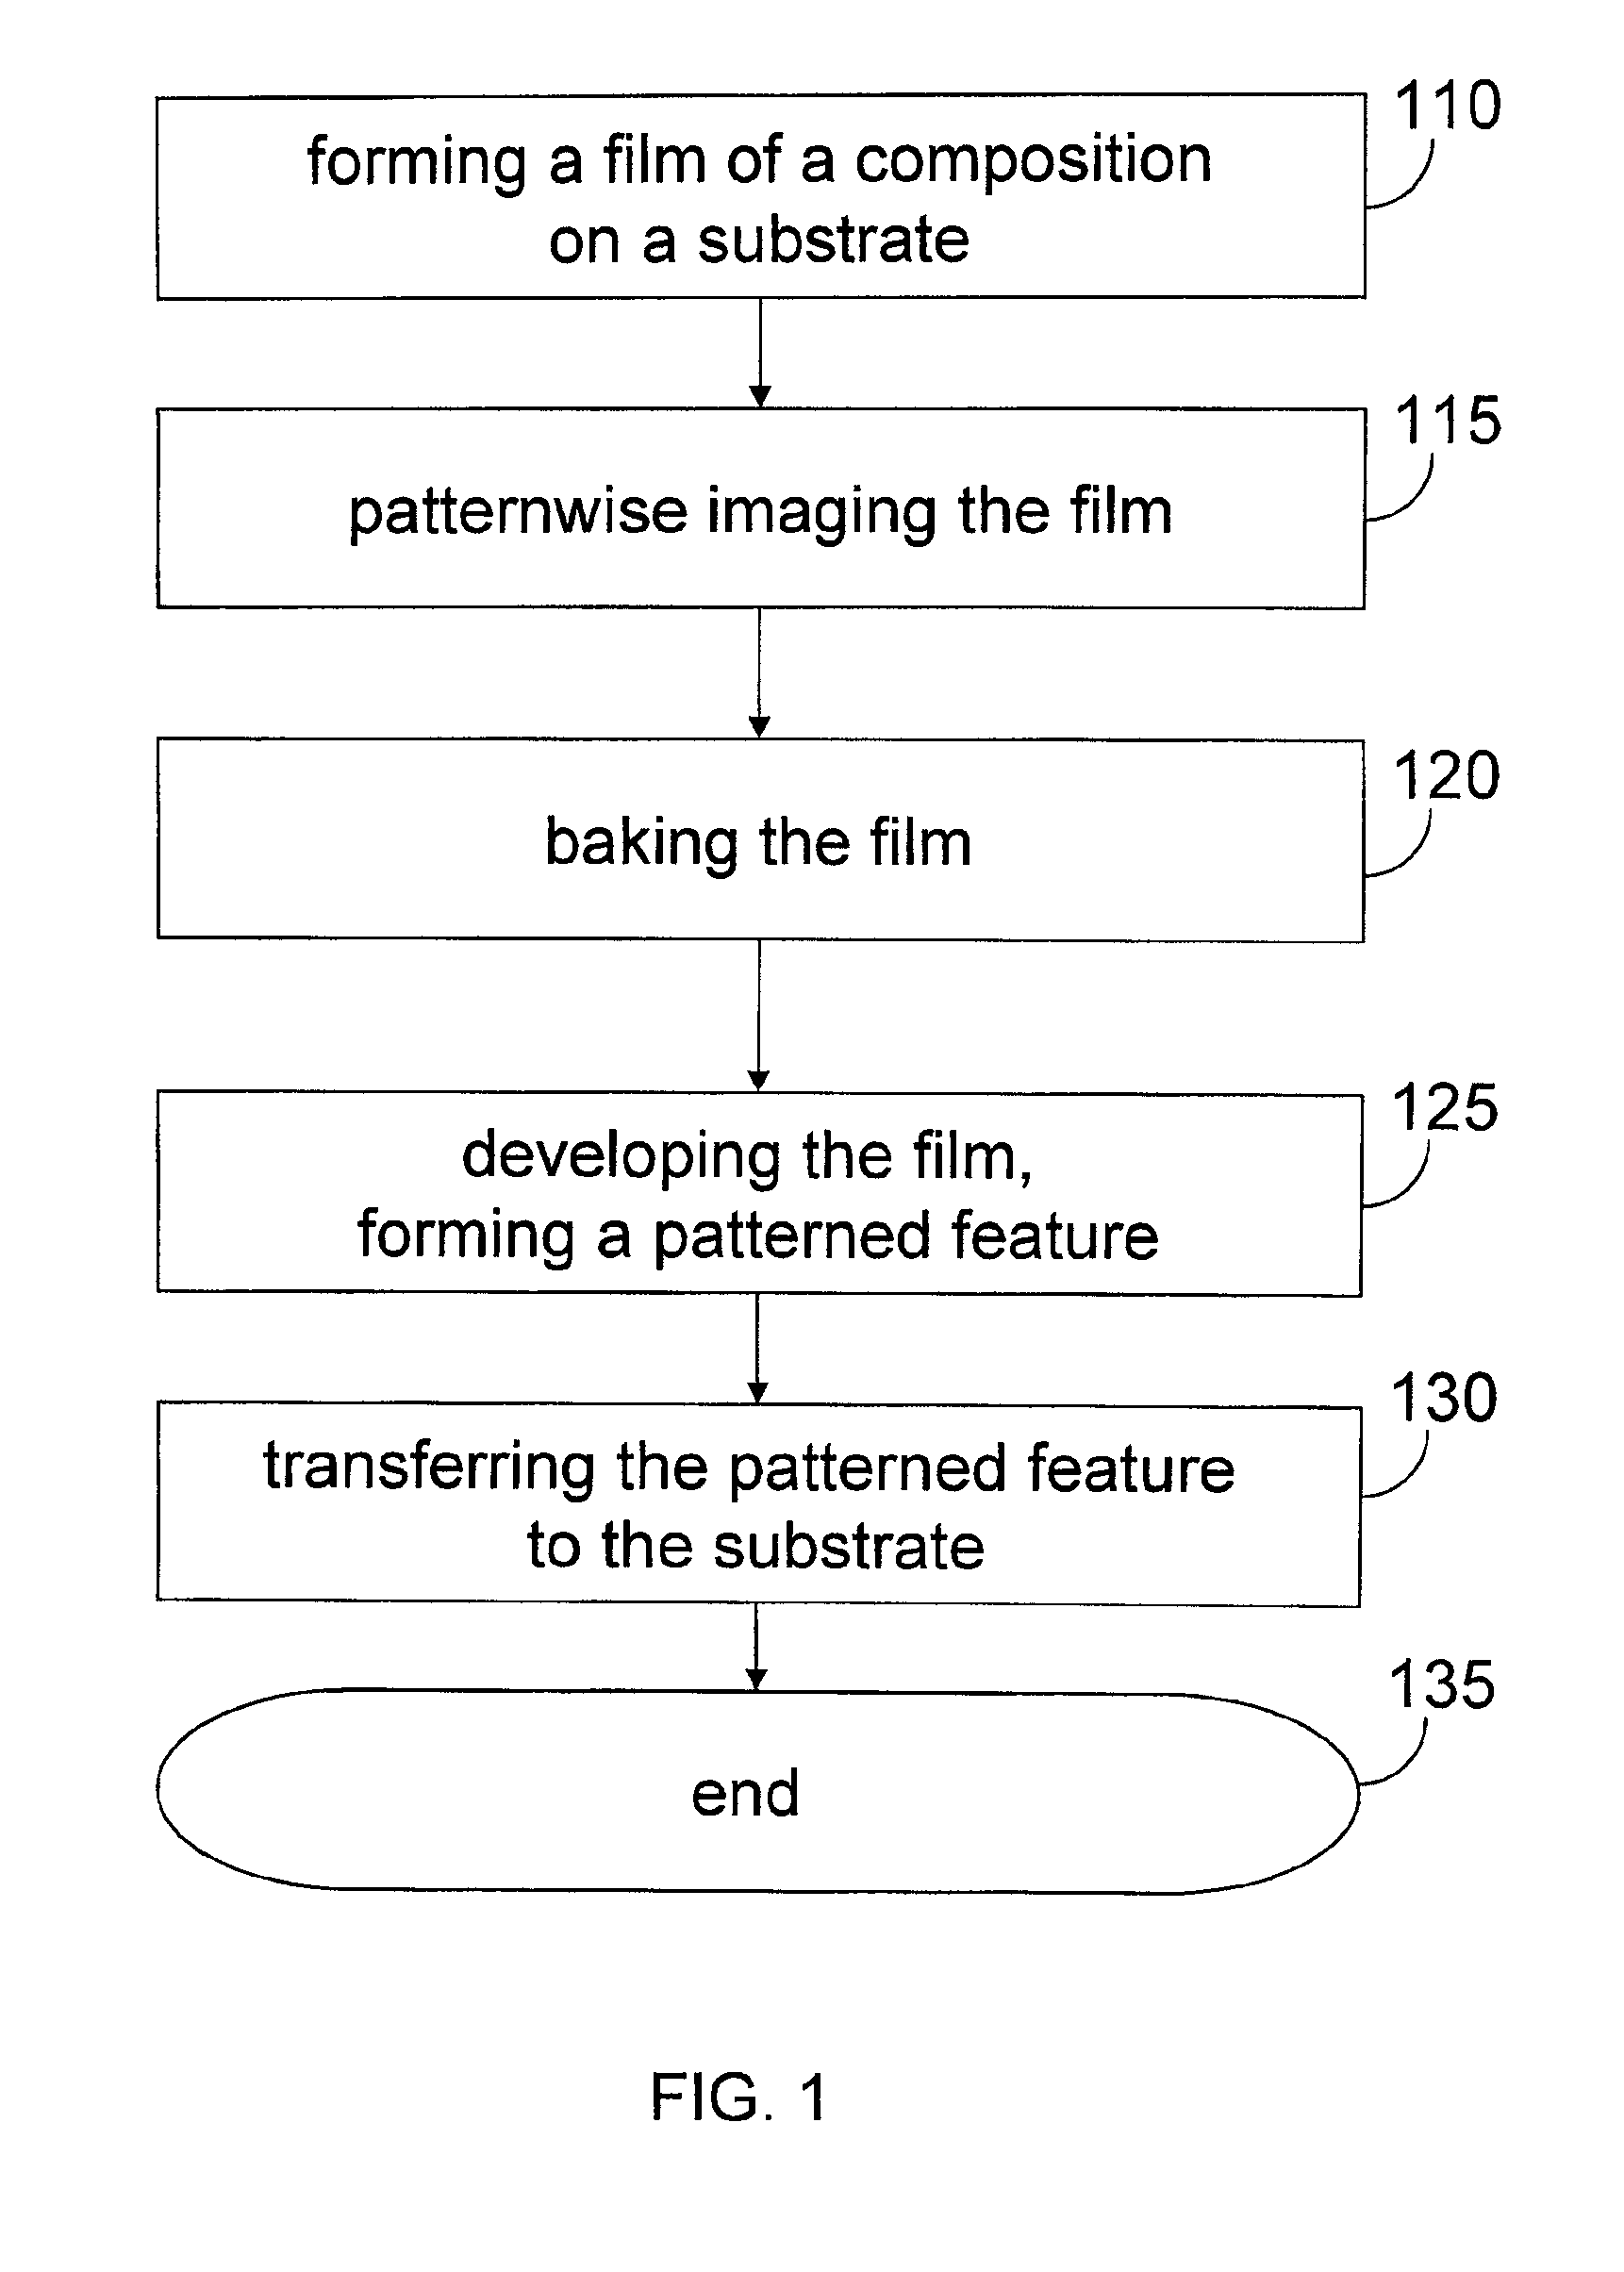 Fused aromatic structures and methods for photolithographic applications